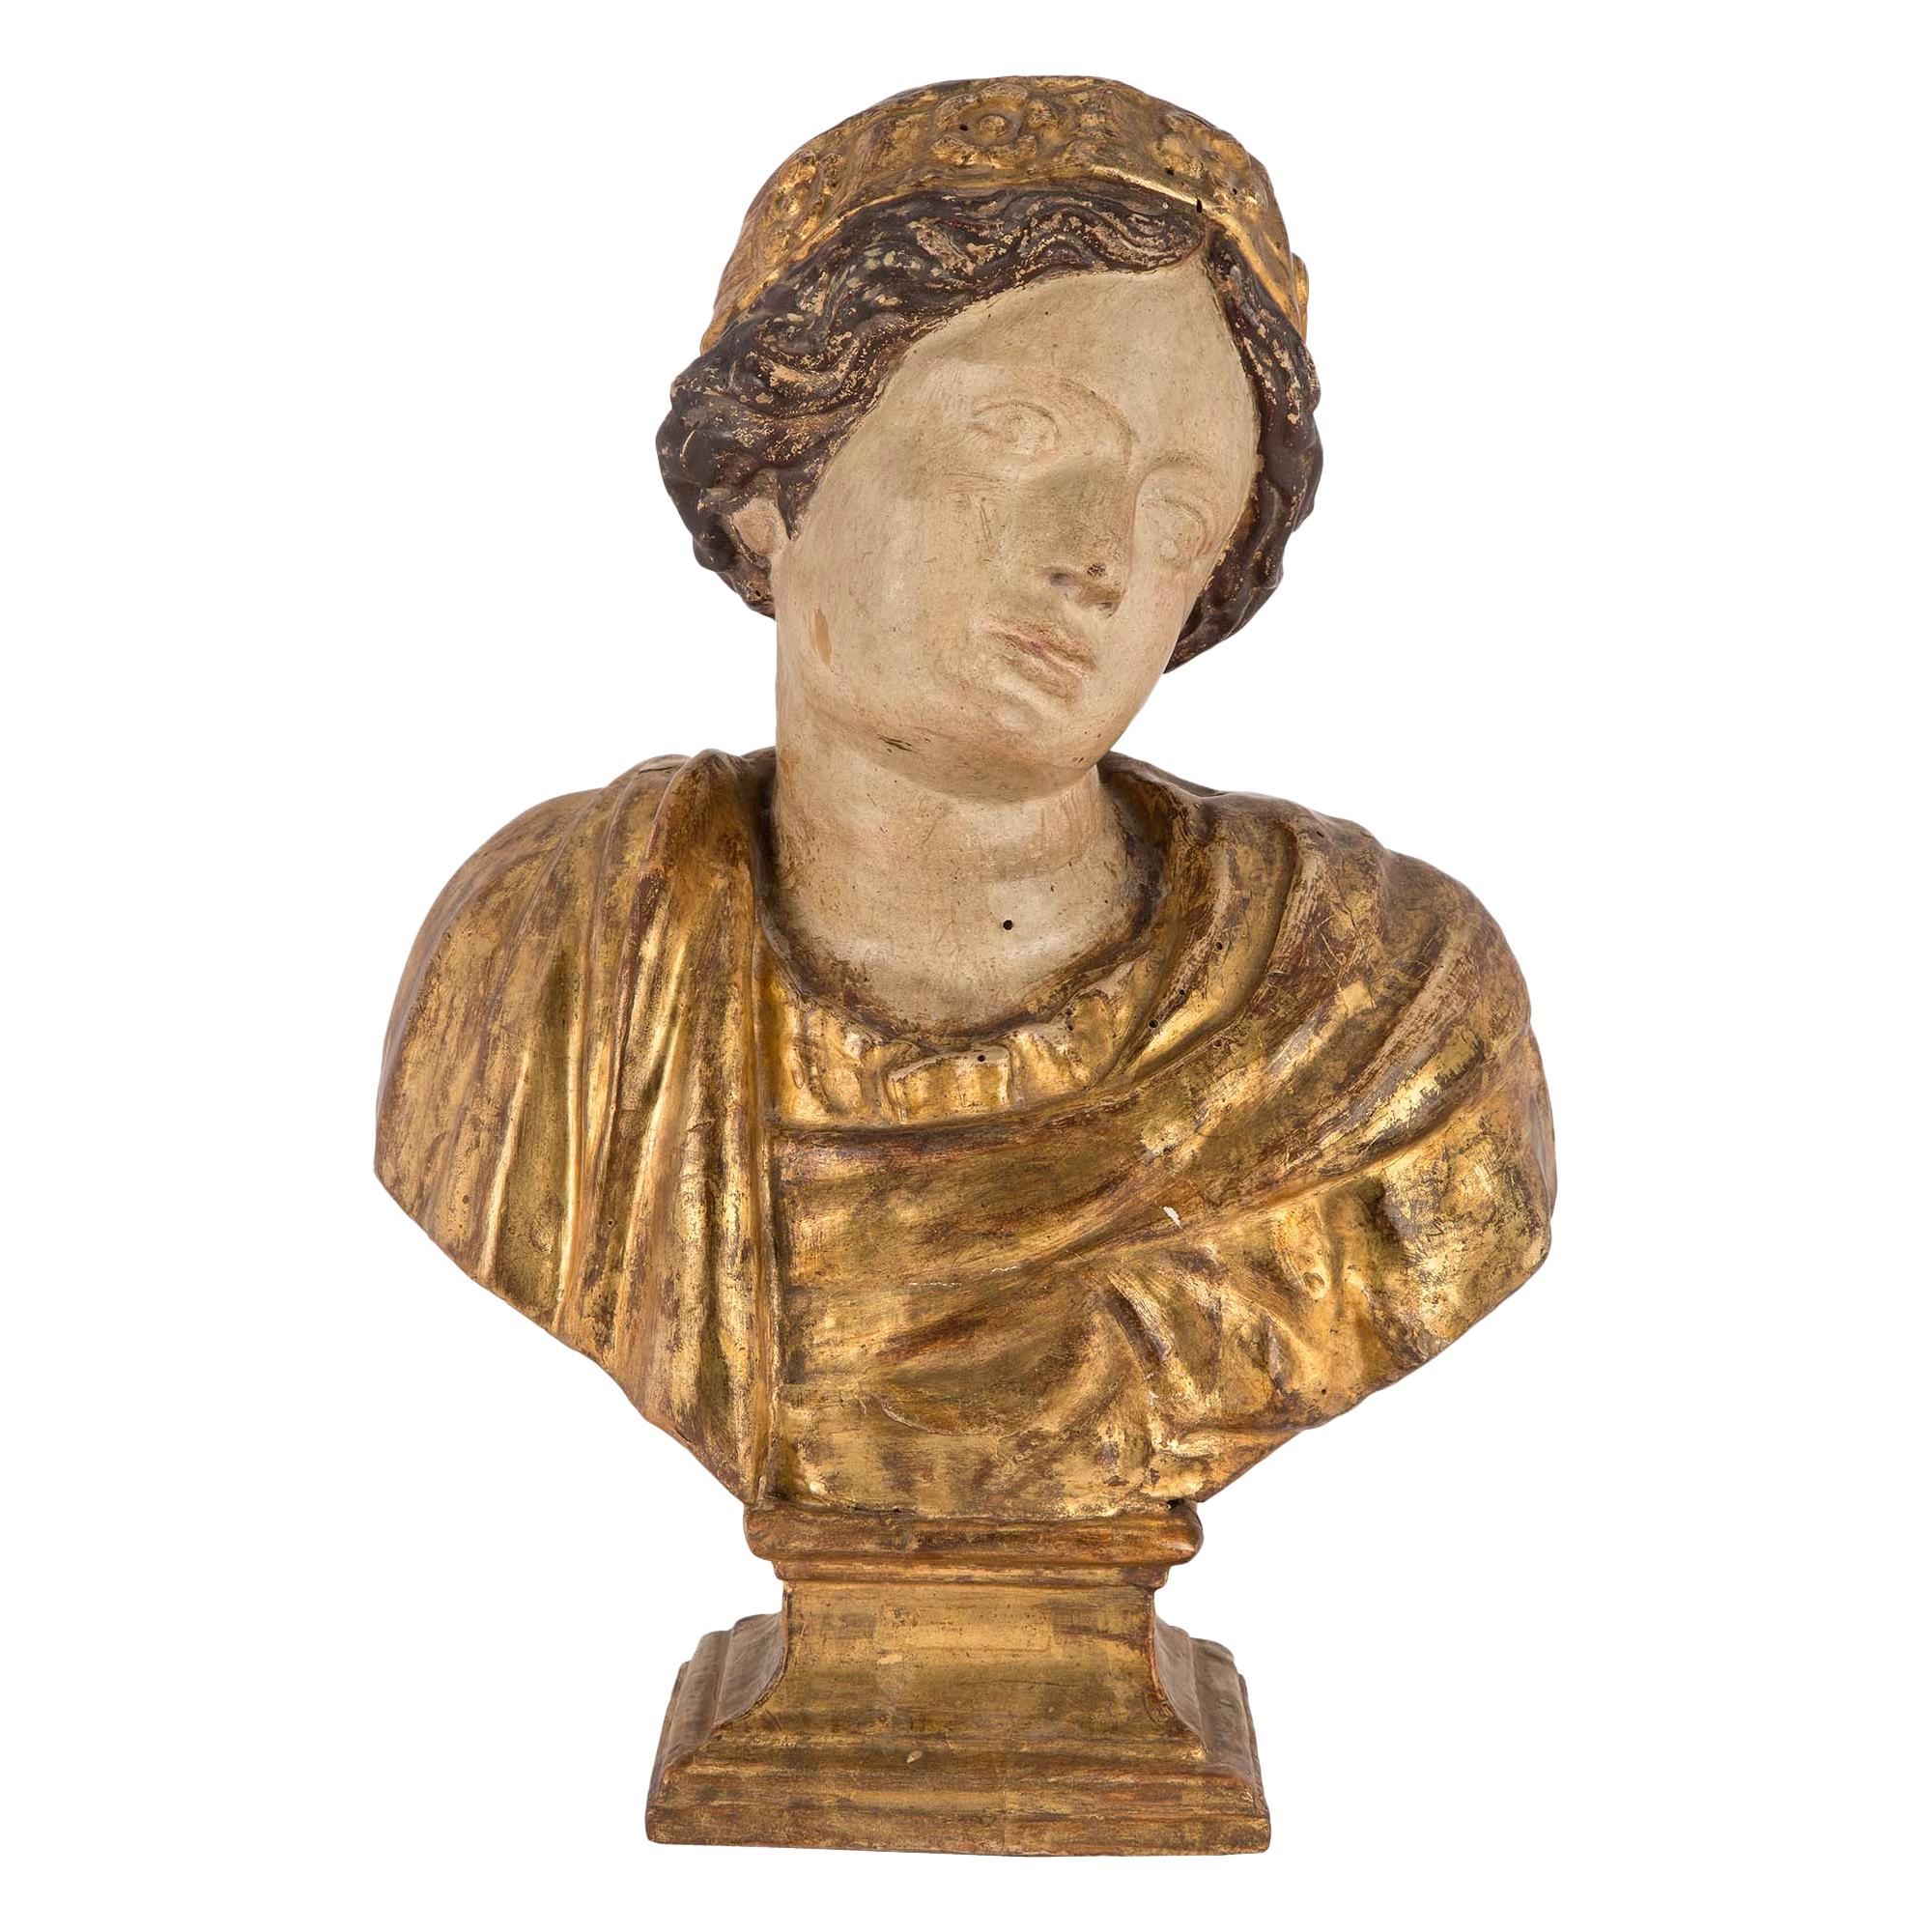 Italian Mid-17th Century Baroque Period Giltwood and Polychrome Bust